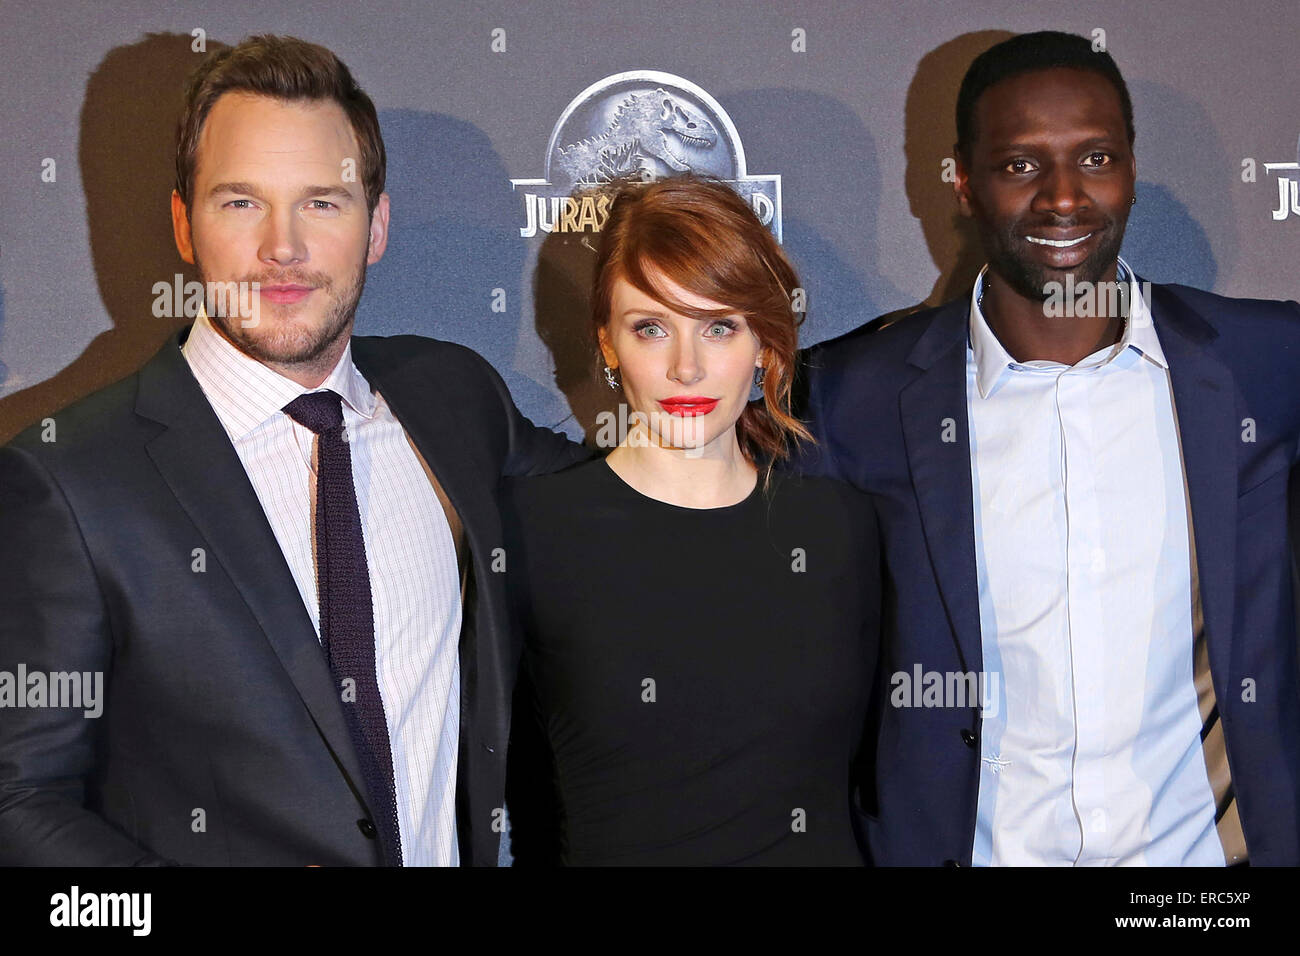 American actor Chris Pratt, American actress Bryce Dallas Howard and French actor Omar Sy attend the premiere of the movie 'Jurassic World' at the UGC Normandie in Paris. On 29 of May, 2015./picture alliance Stock Photo